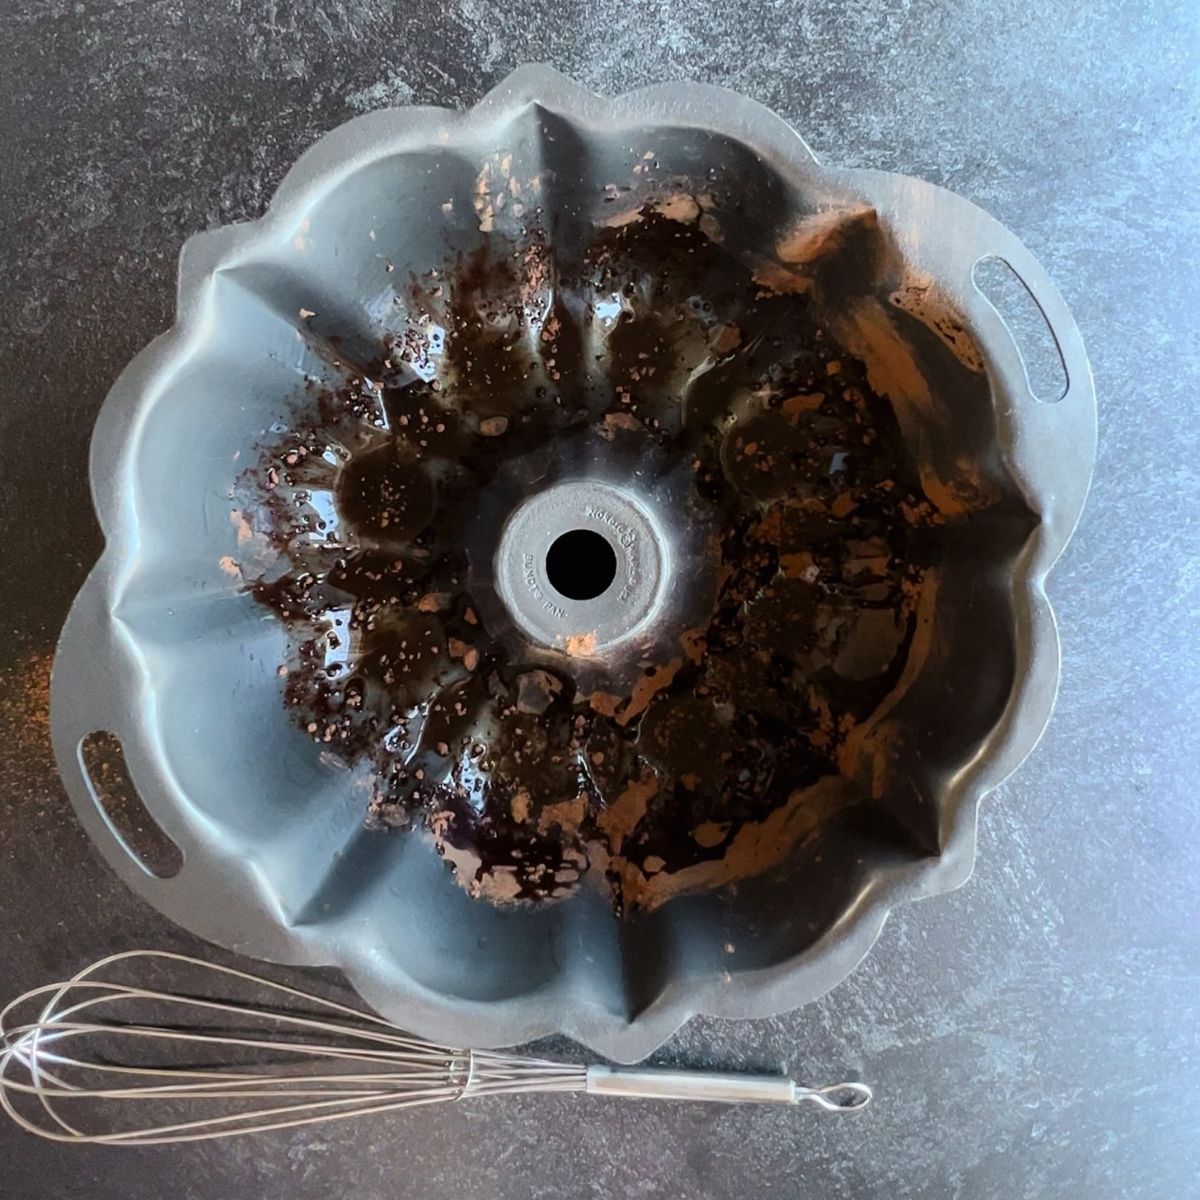 Bundt pan greased and with cocoa powder dusted on the inside.